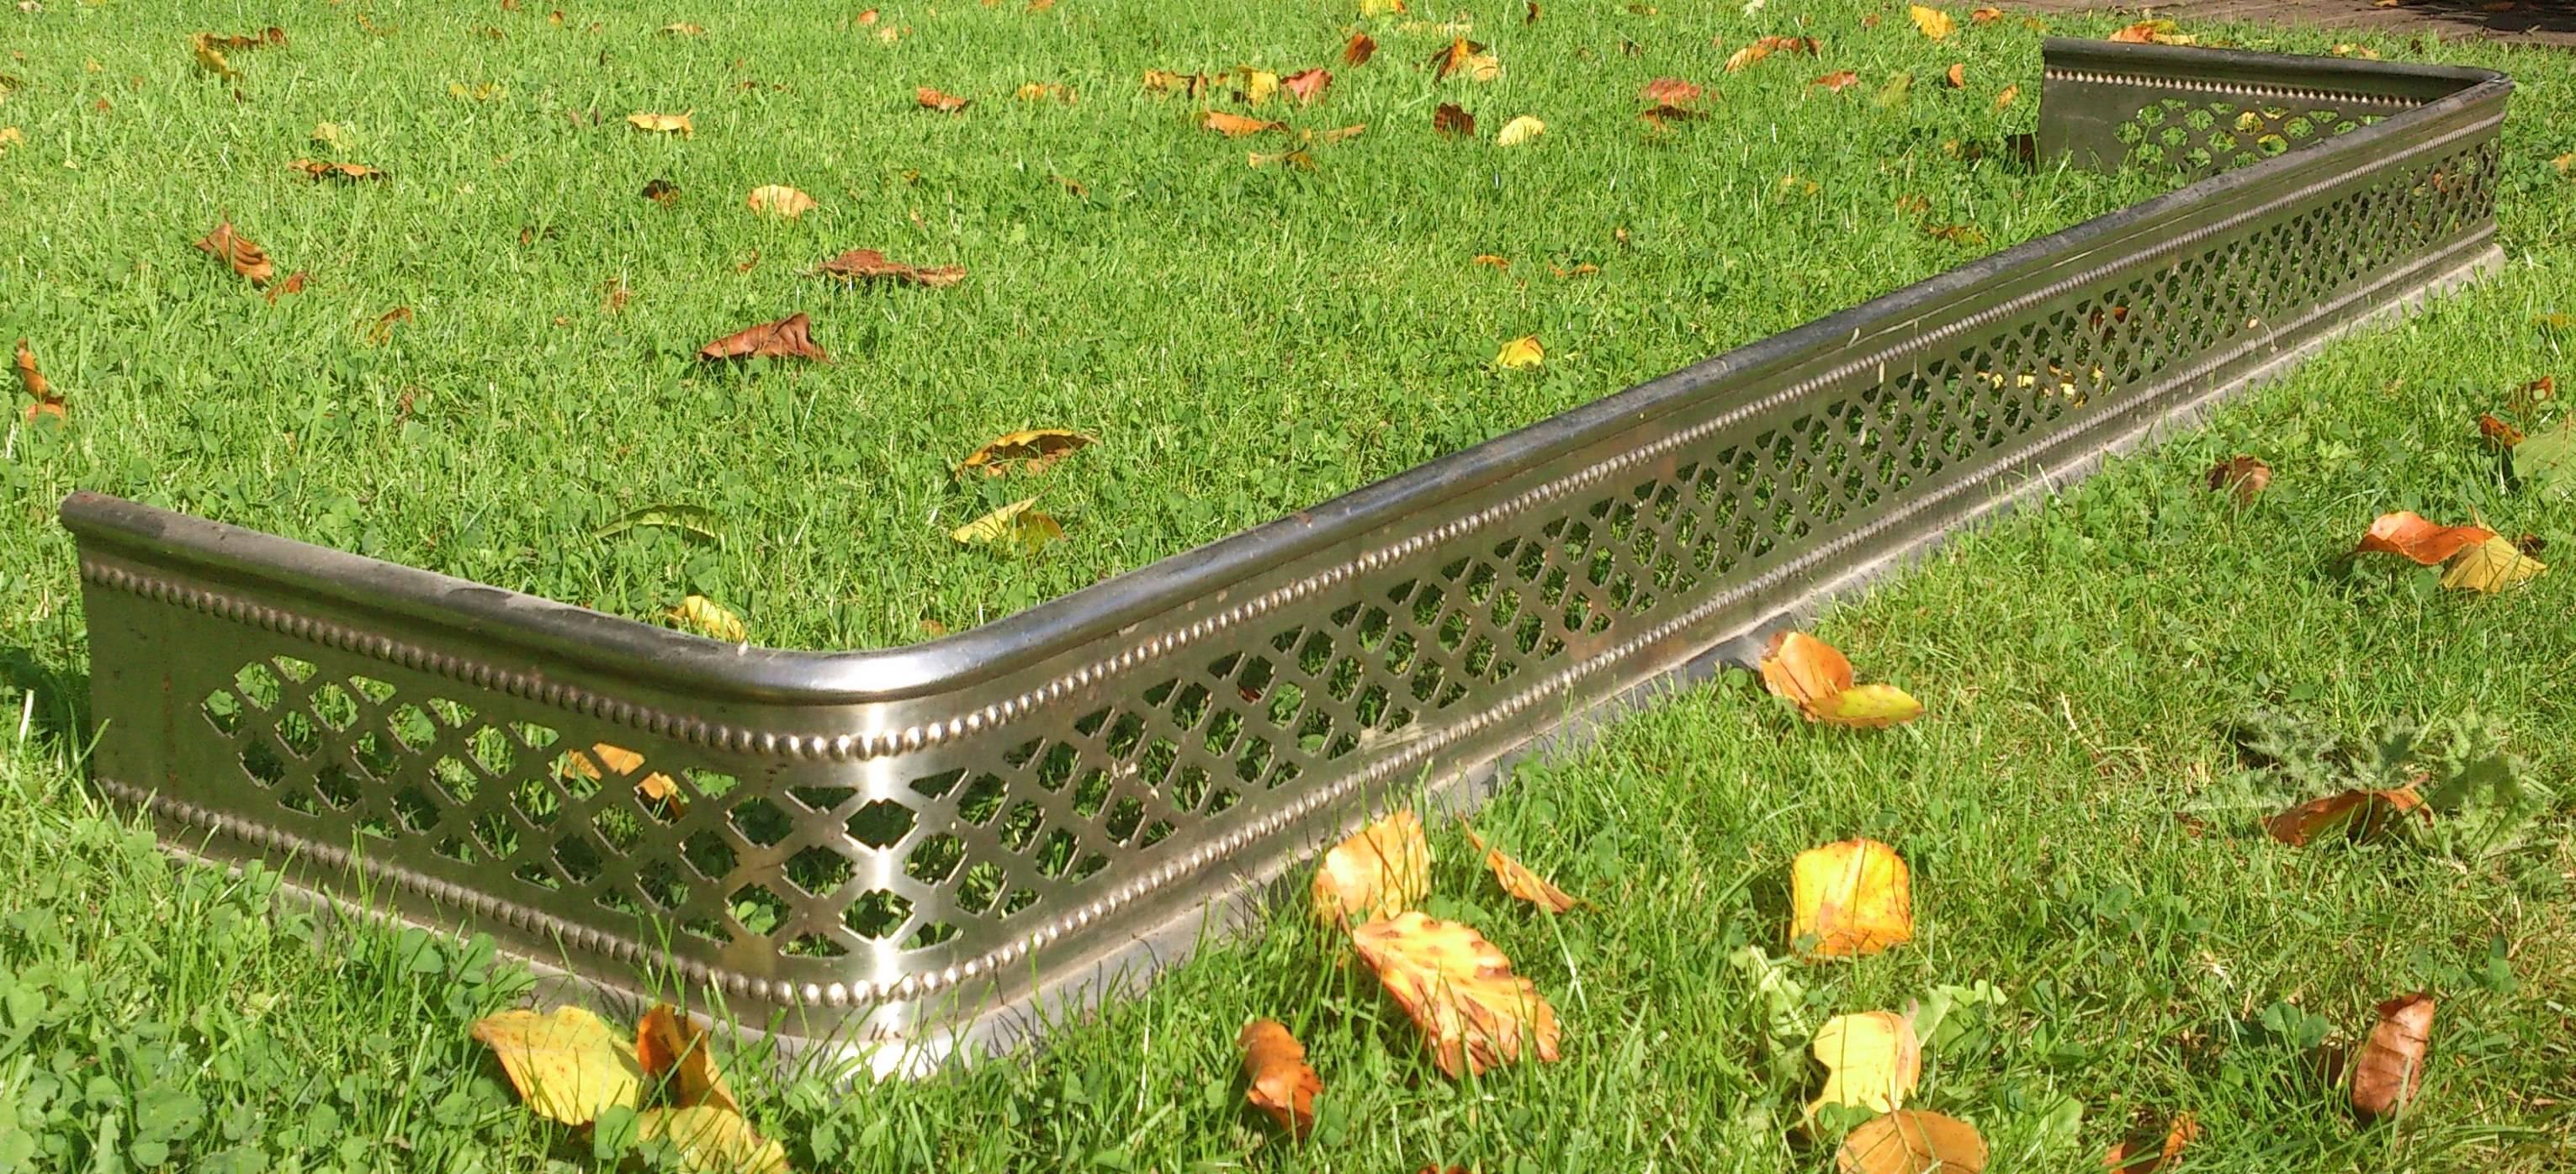 This is a very unusual fire fender being as it is an important early example of stainless steel manufacture. This is a pleasing design which is a good weight despite having intricate pierced latticework decoration. Difficult to date, but probably